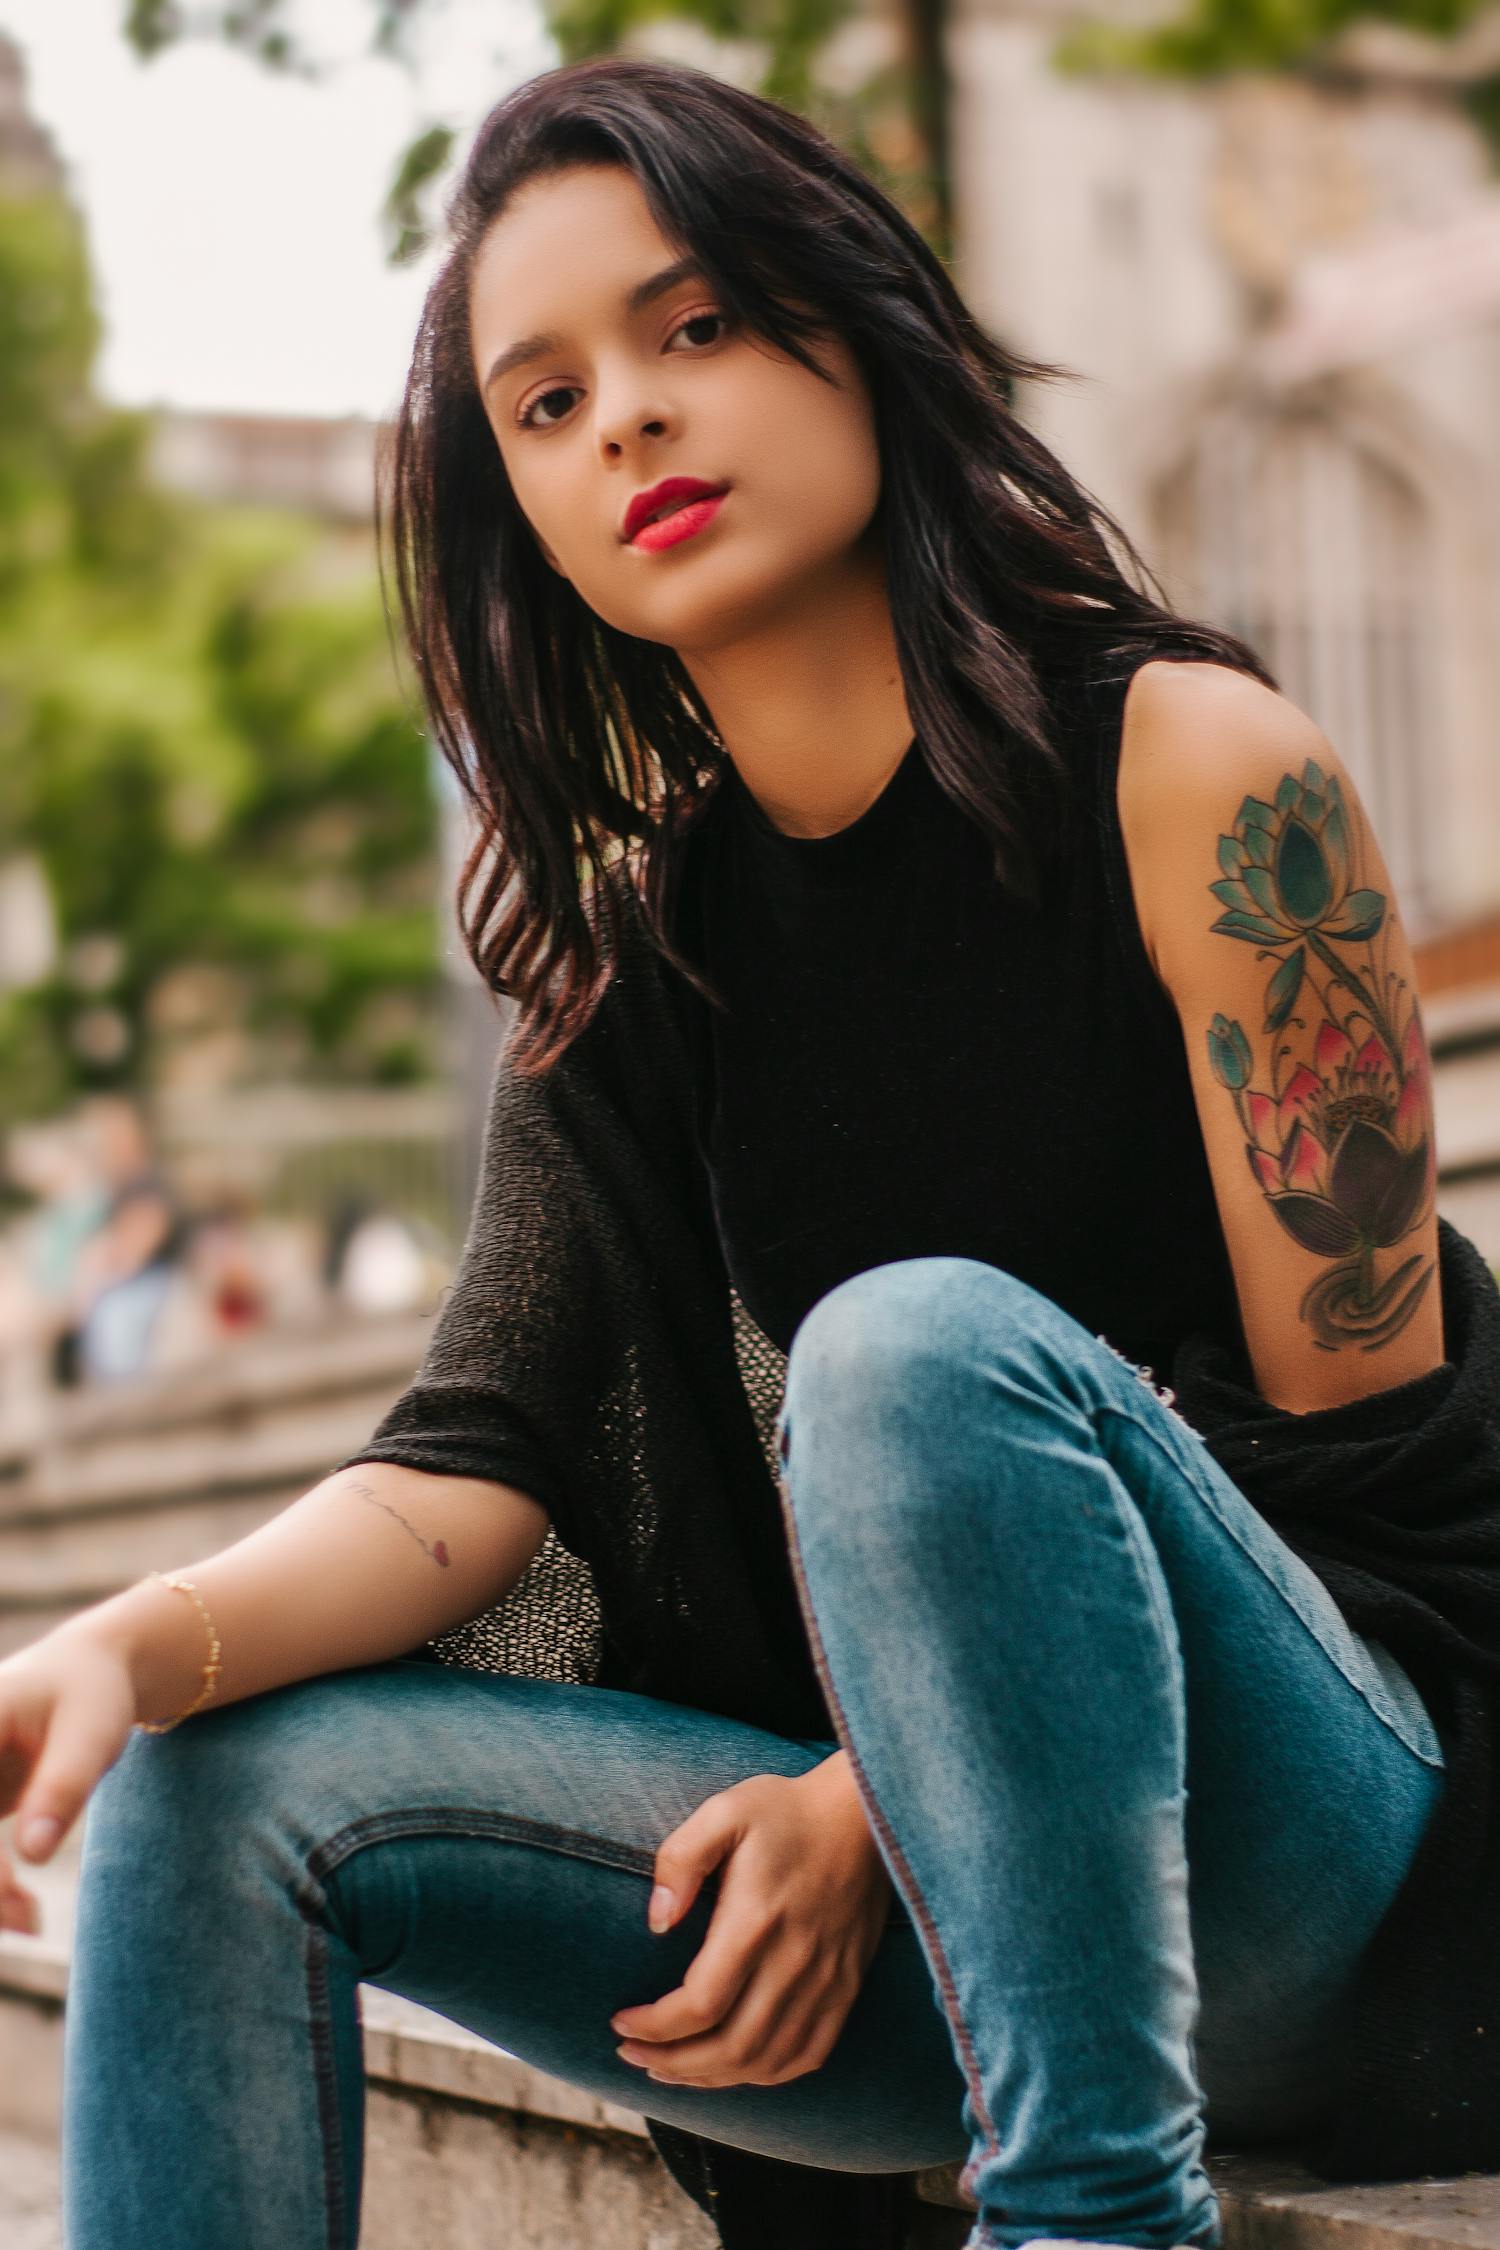 Free stock photo of blue jeans, dame, portrait